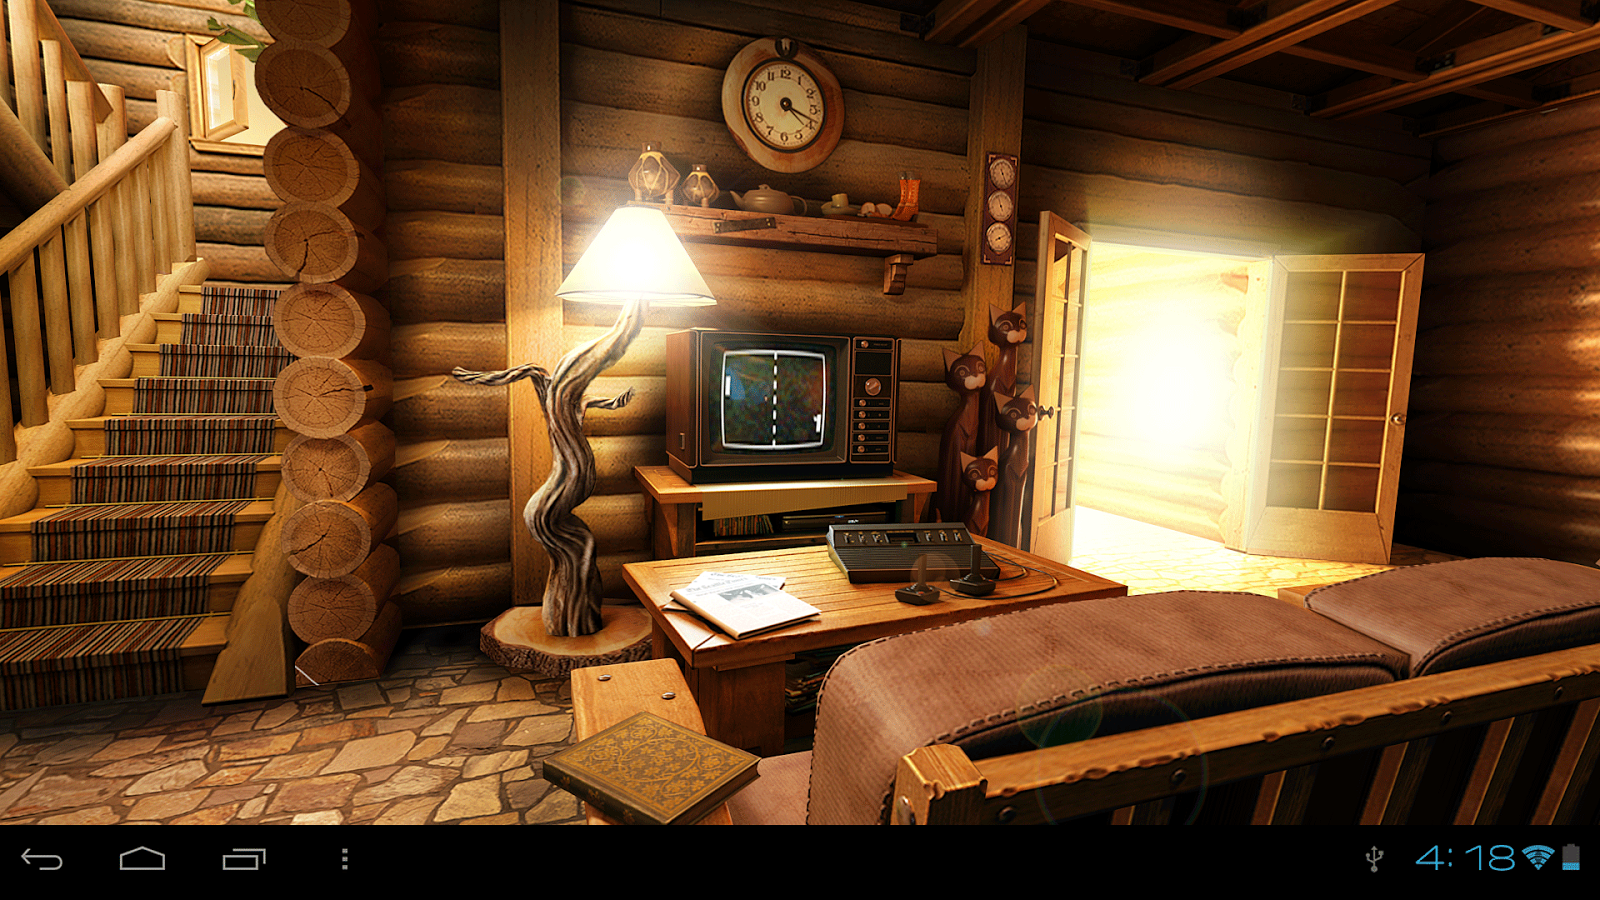 My Log Home 3d Wallpaper Android Apps On Google Play